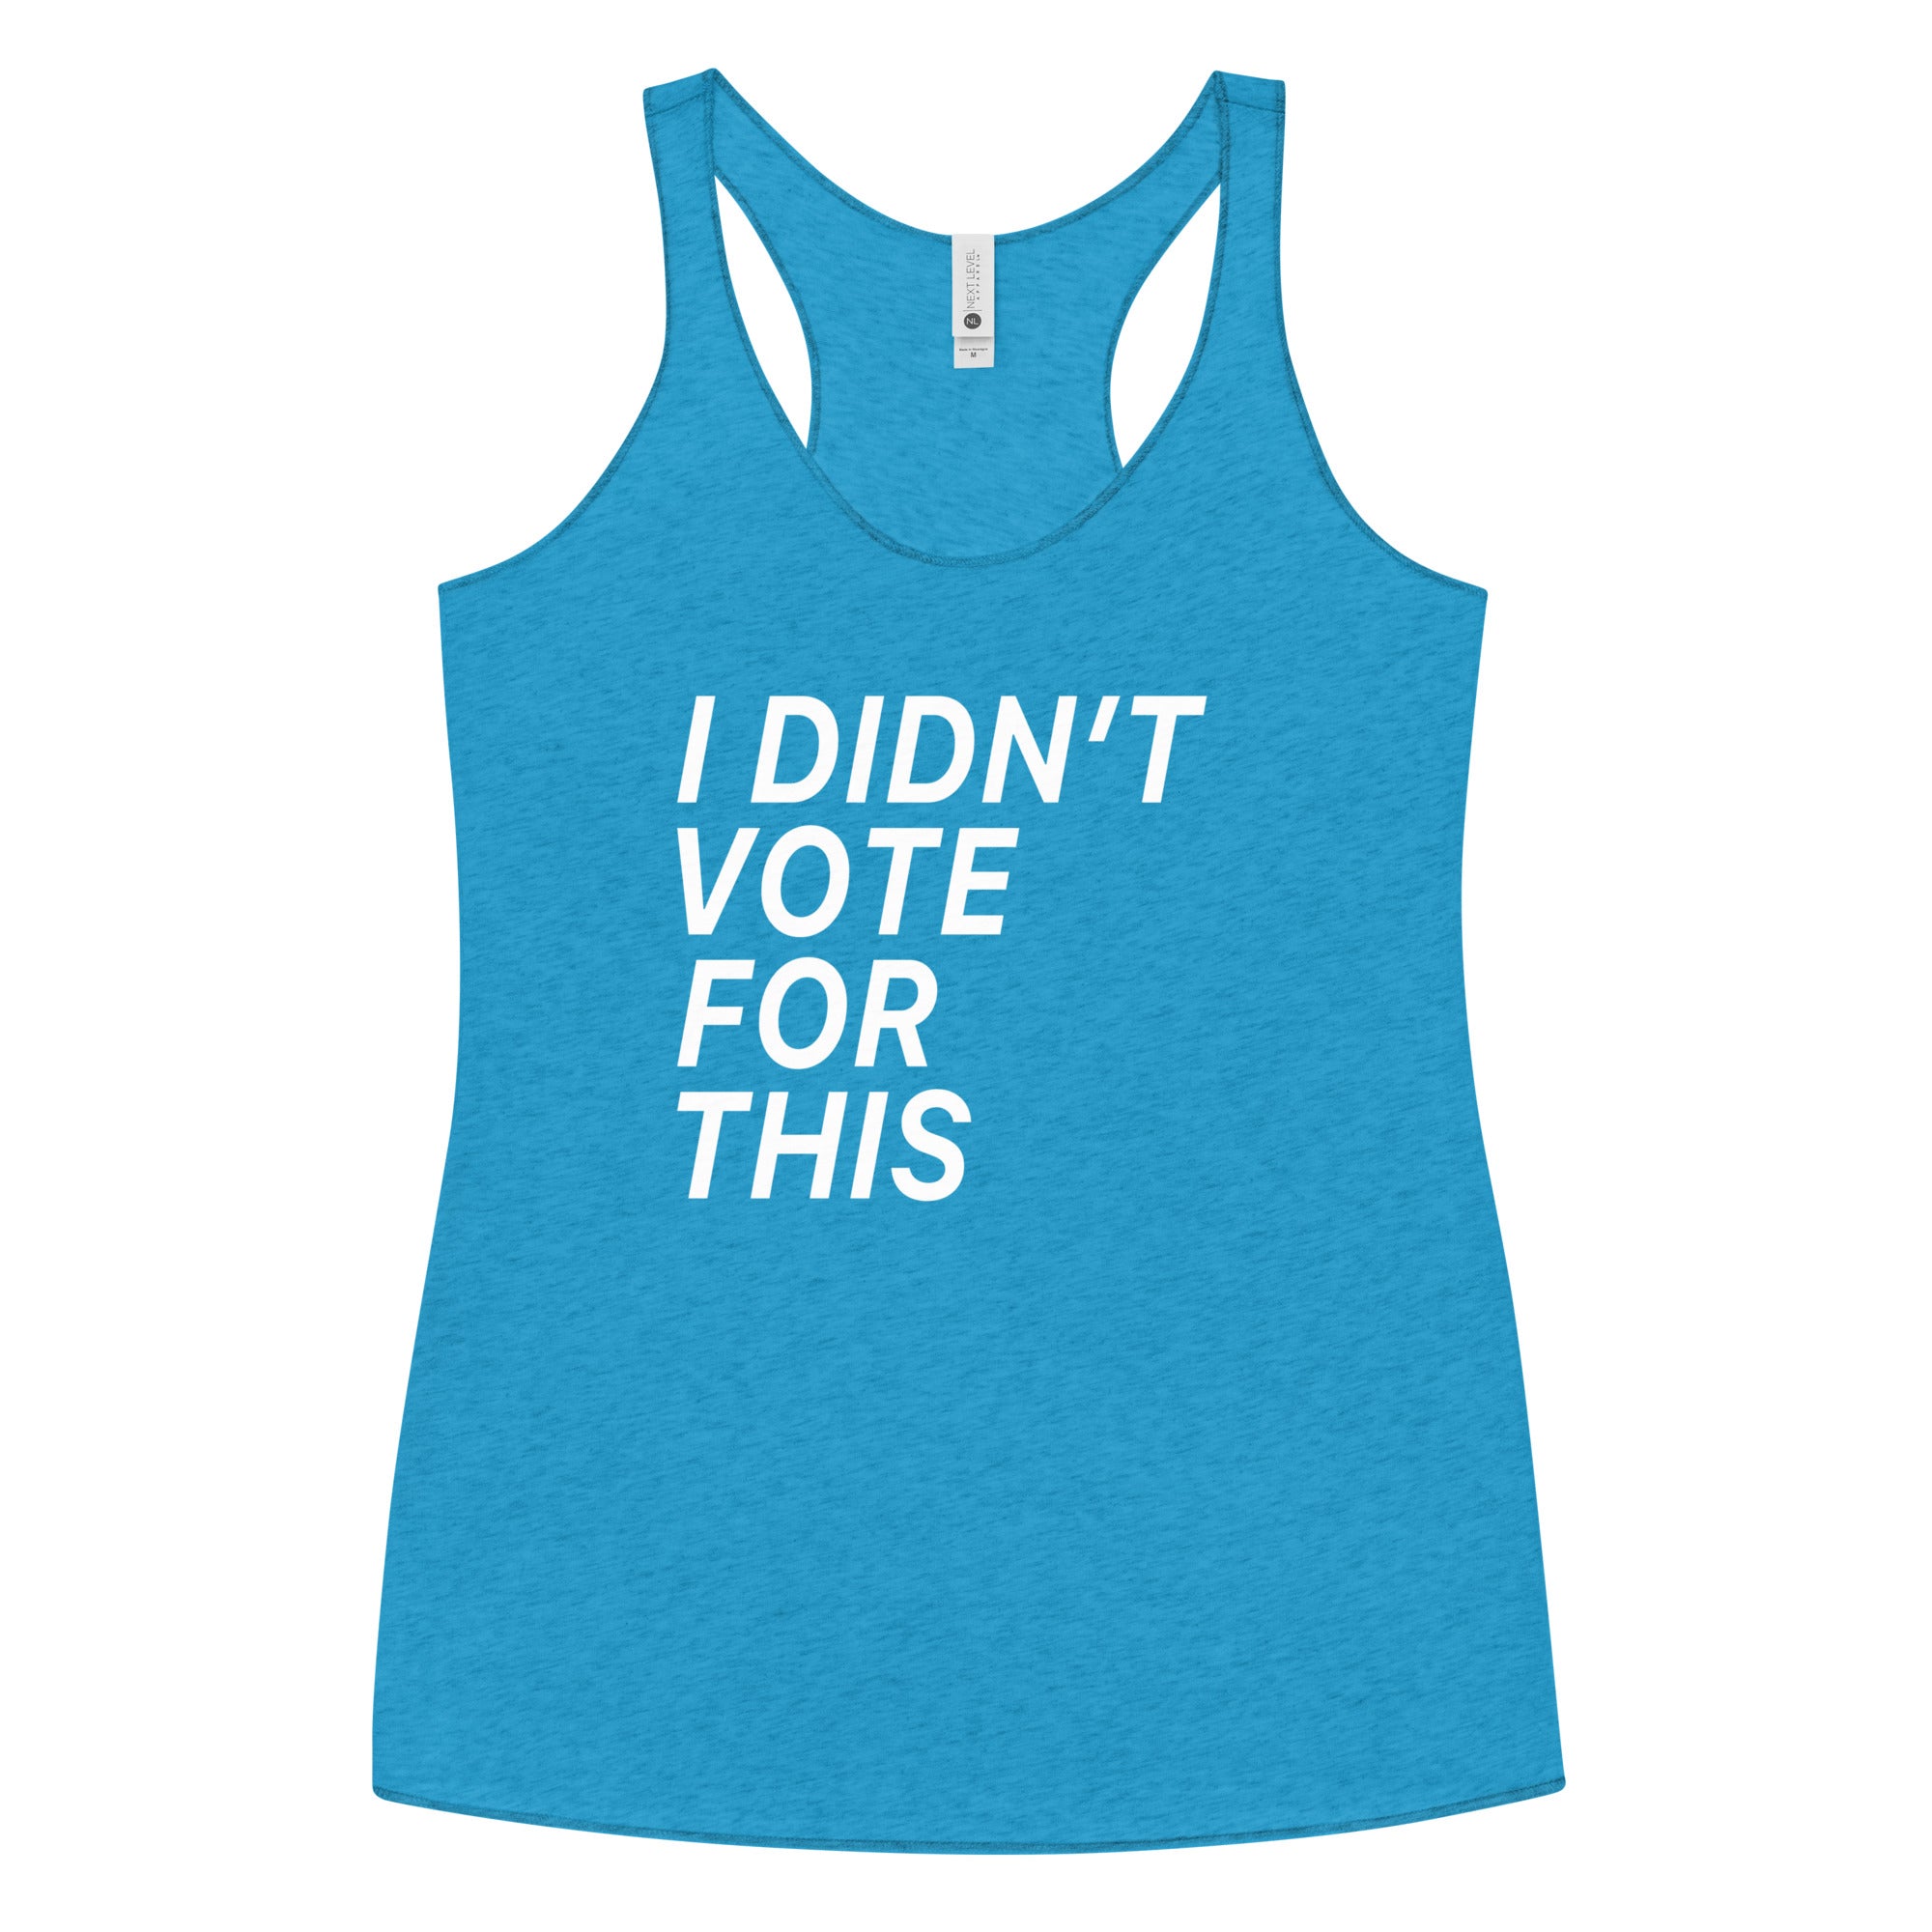 I Didn't Vote For This Racerback Tee